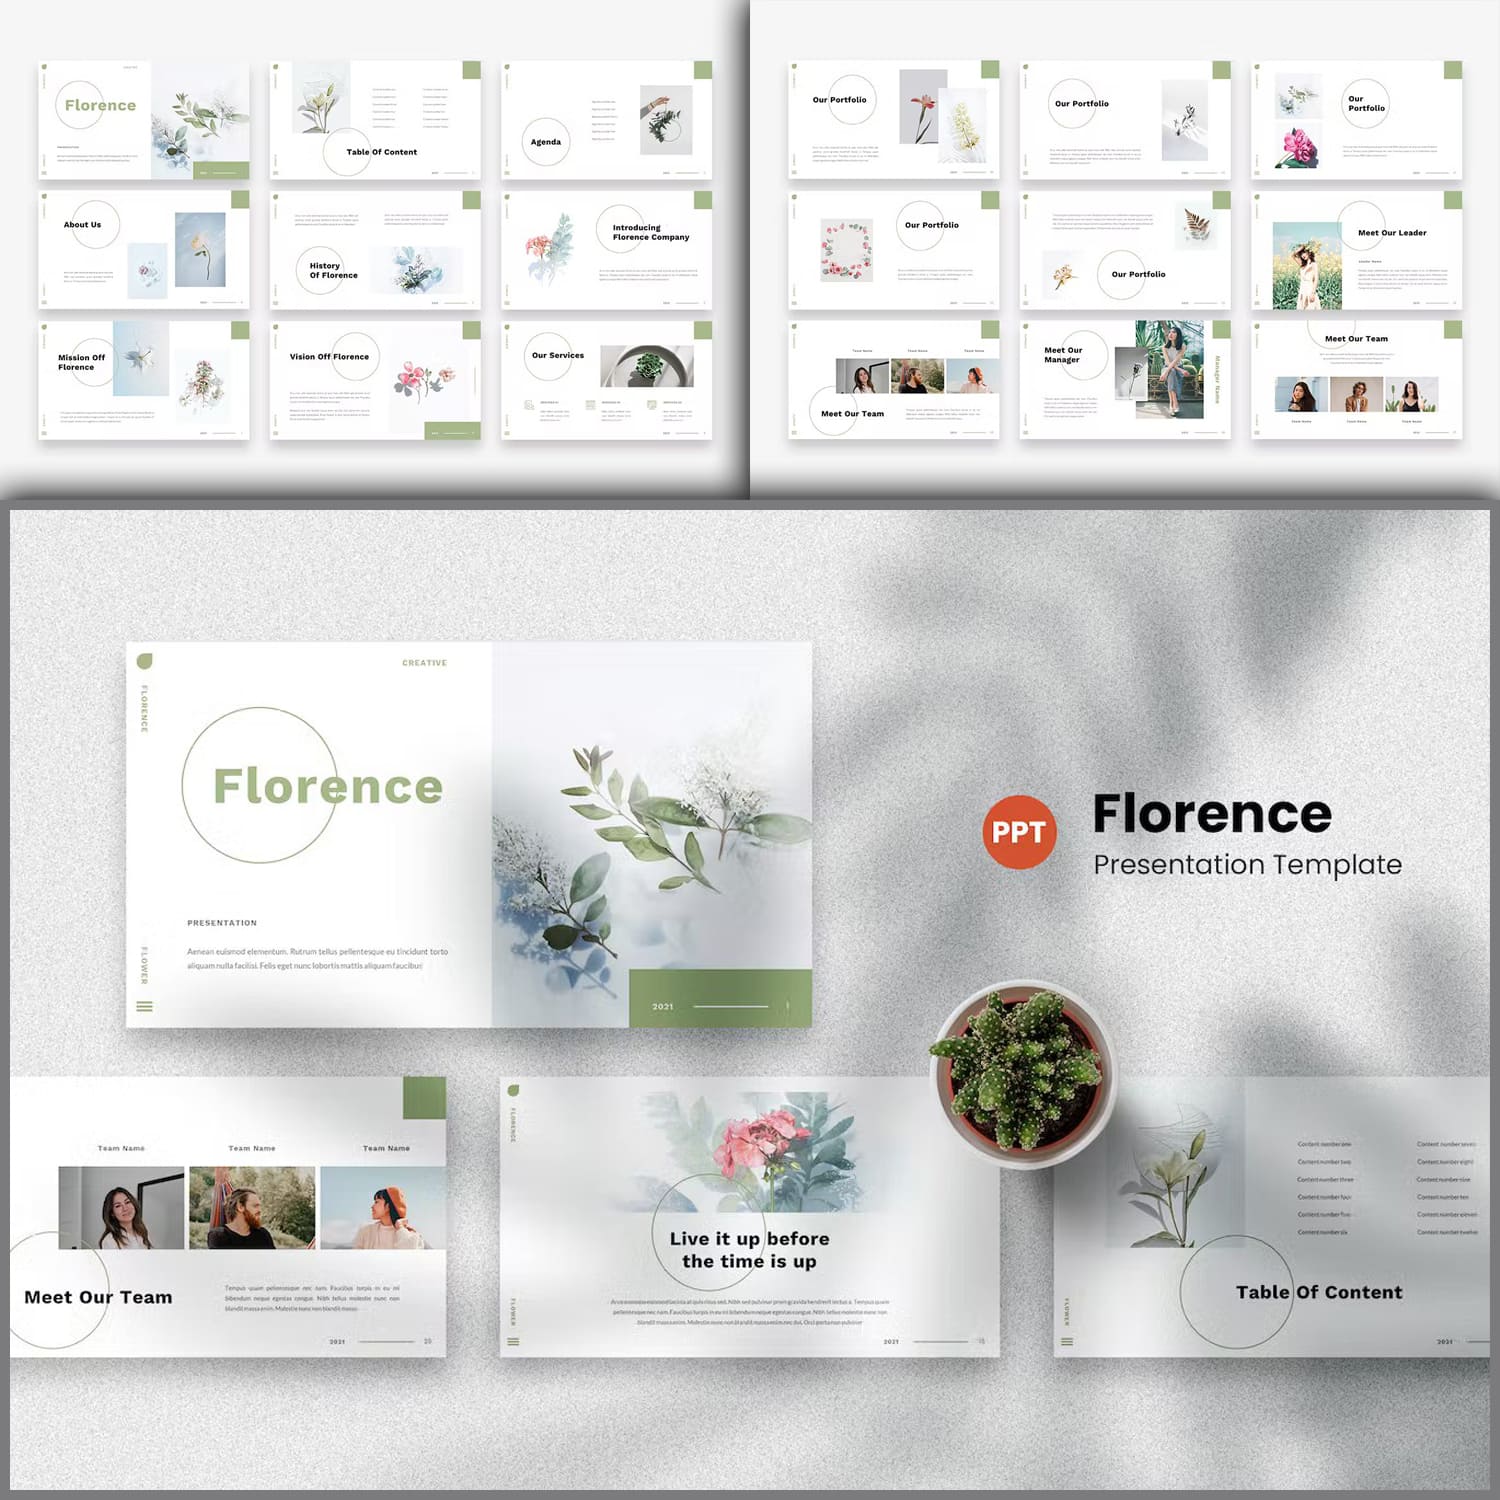 Florence PowerPoint Template created by TyperLine.